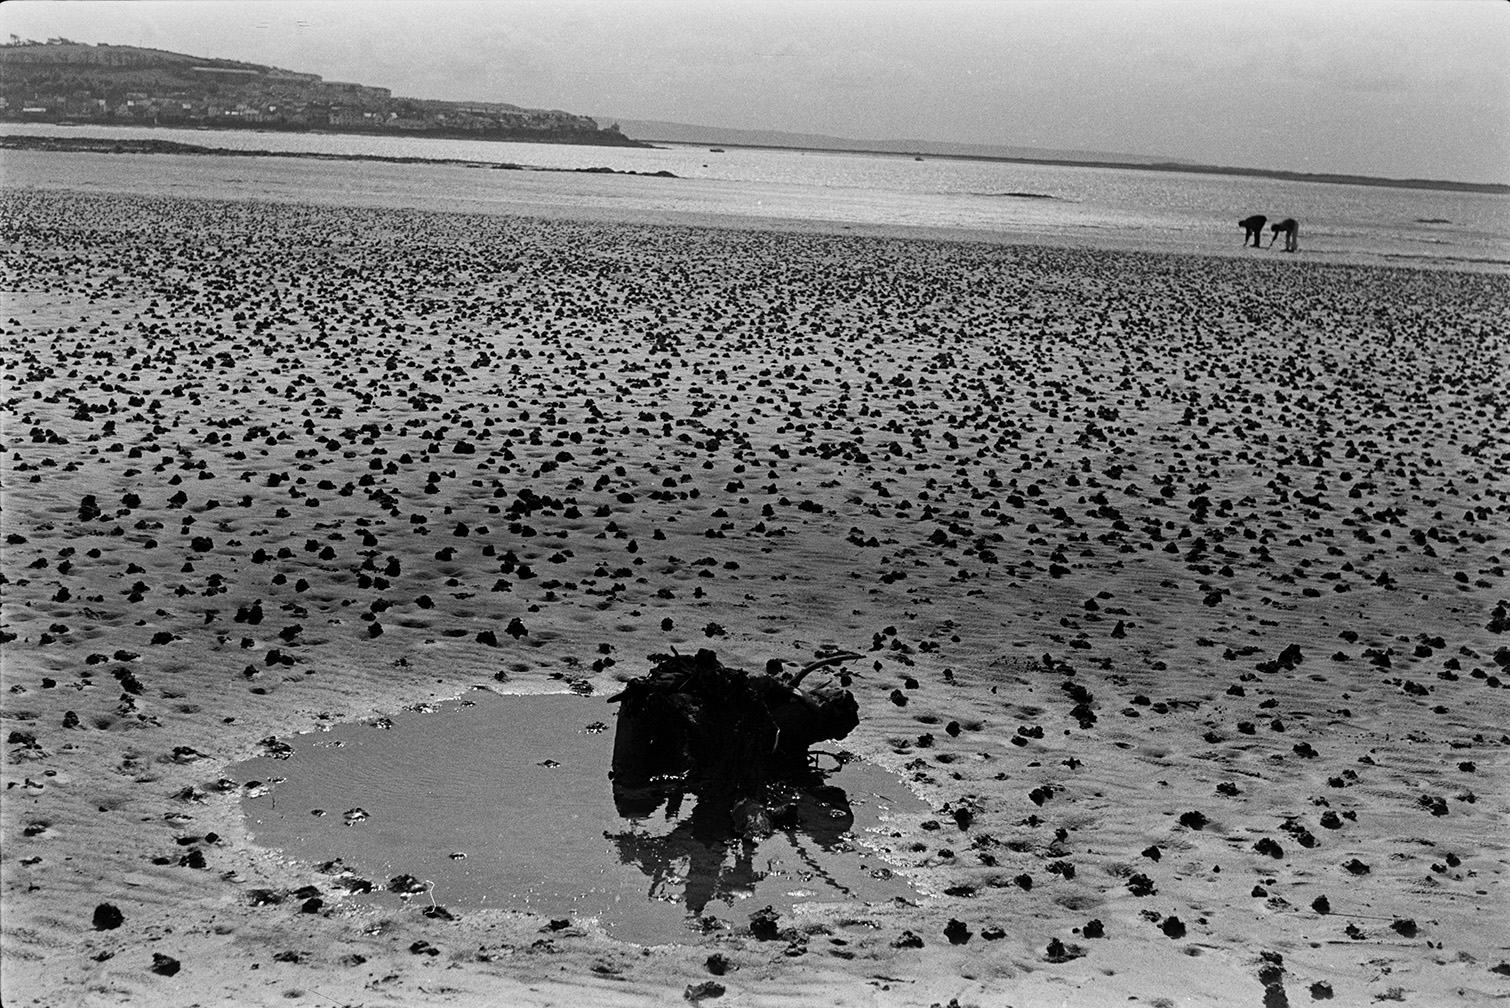 People digging for worms on the beach at Instow. Lugworm casts can be seen on the beach in the foreground.